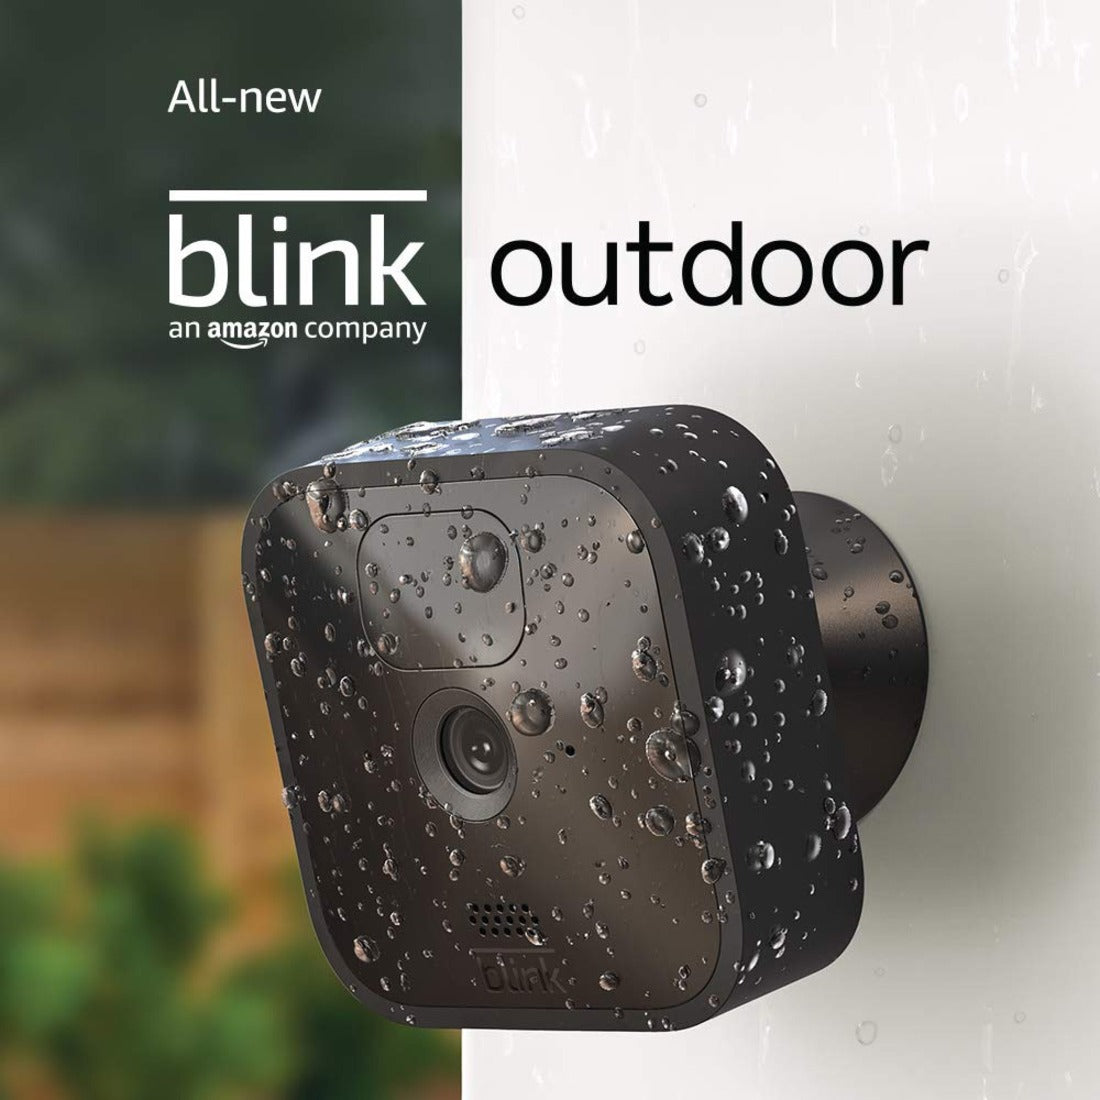 Blink B086DL32R3 HD Network Camera - 2 Pack, Outdoor, Motion Detection, Alexa Supported